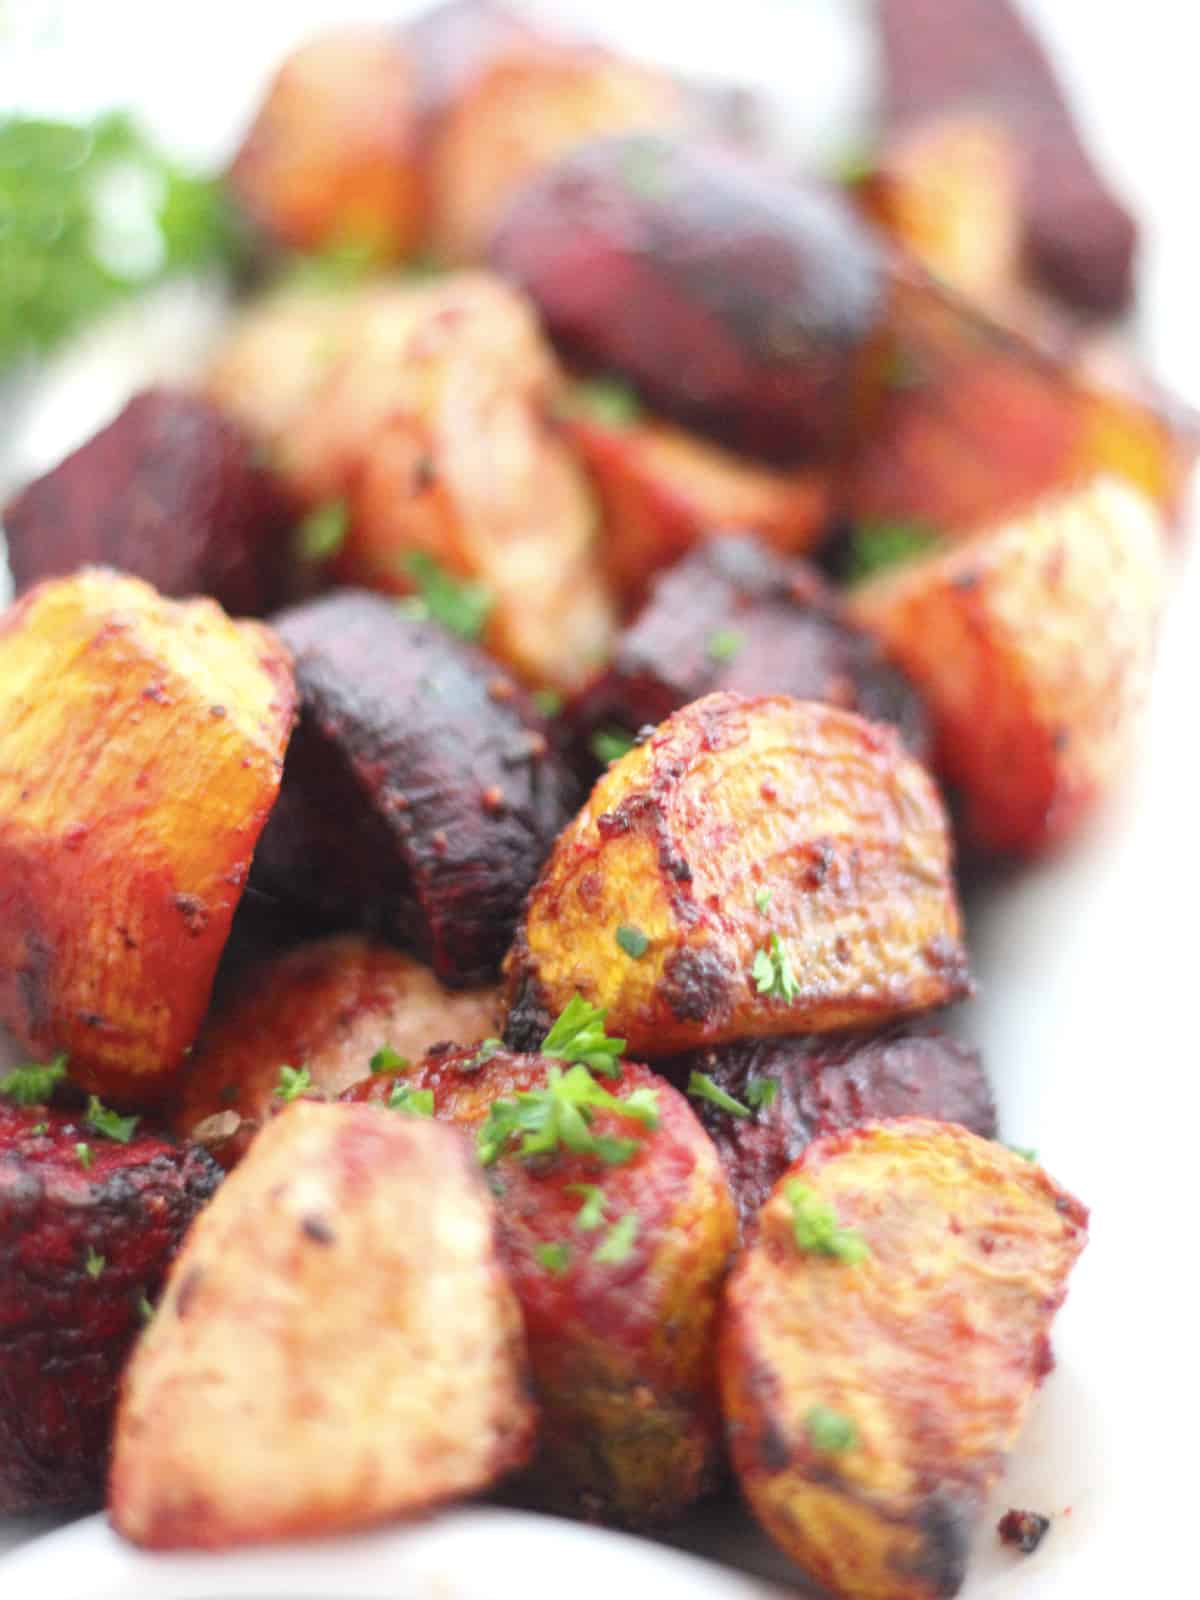 Close up of quartered roasted beets.